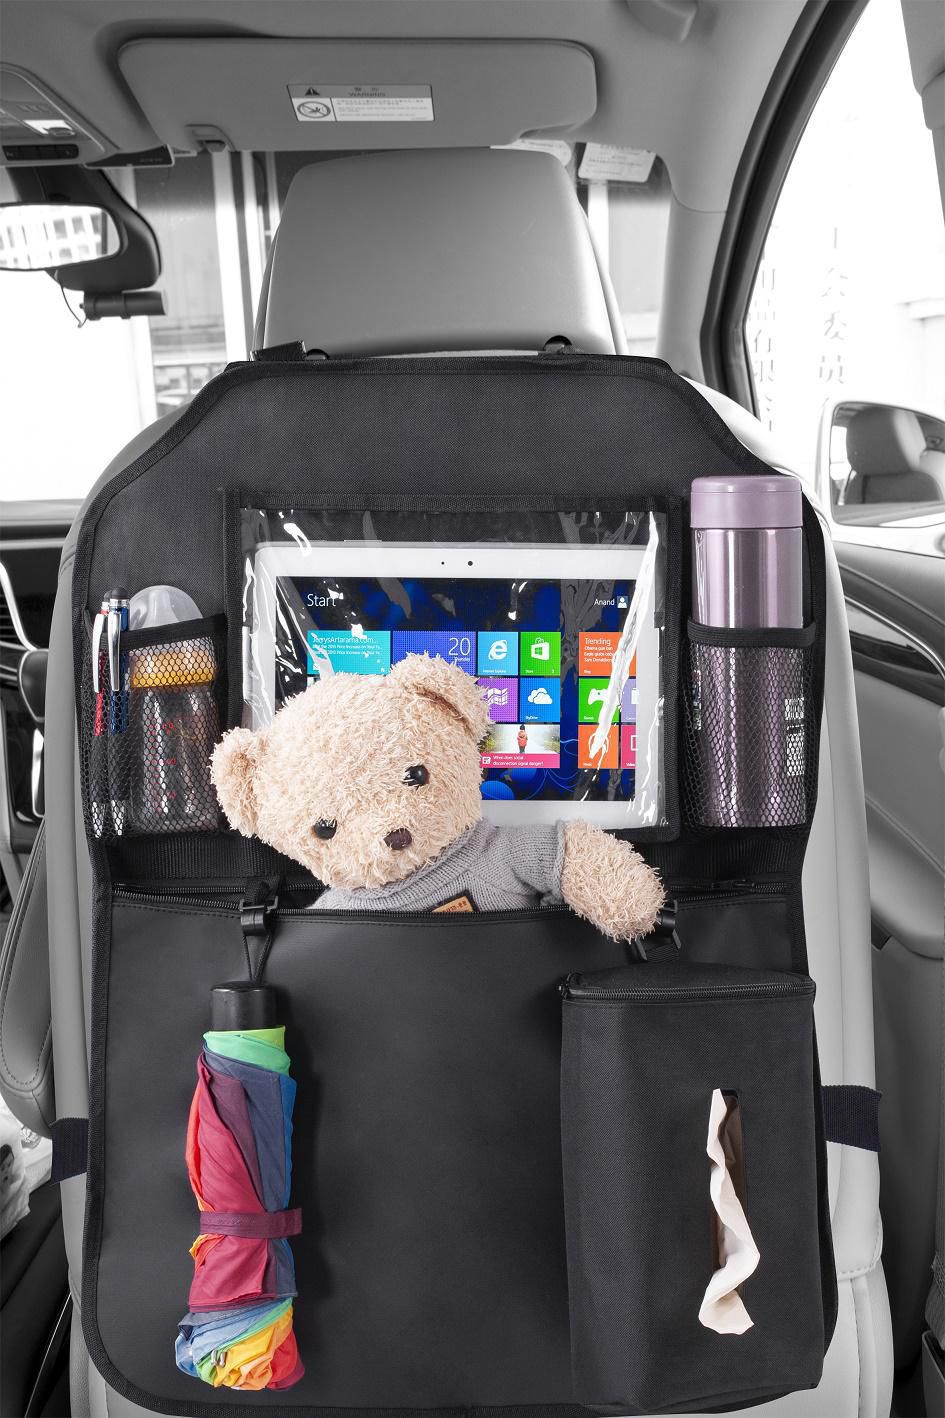 AUTO DRIVE Backseat Organizer with Kick Mat and Tablet Holder Tissue holder  Included, 18.1 in. W x 25.5 in. H